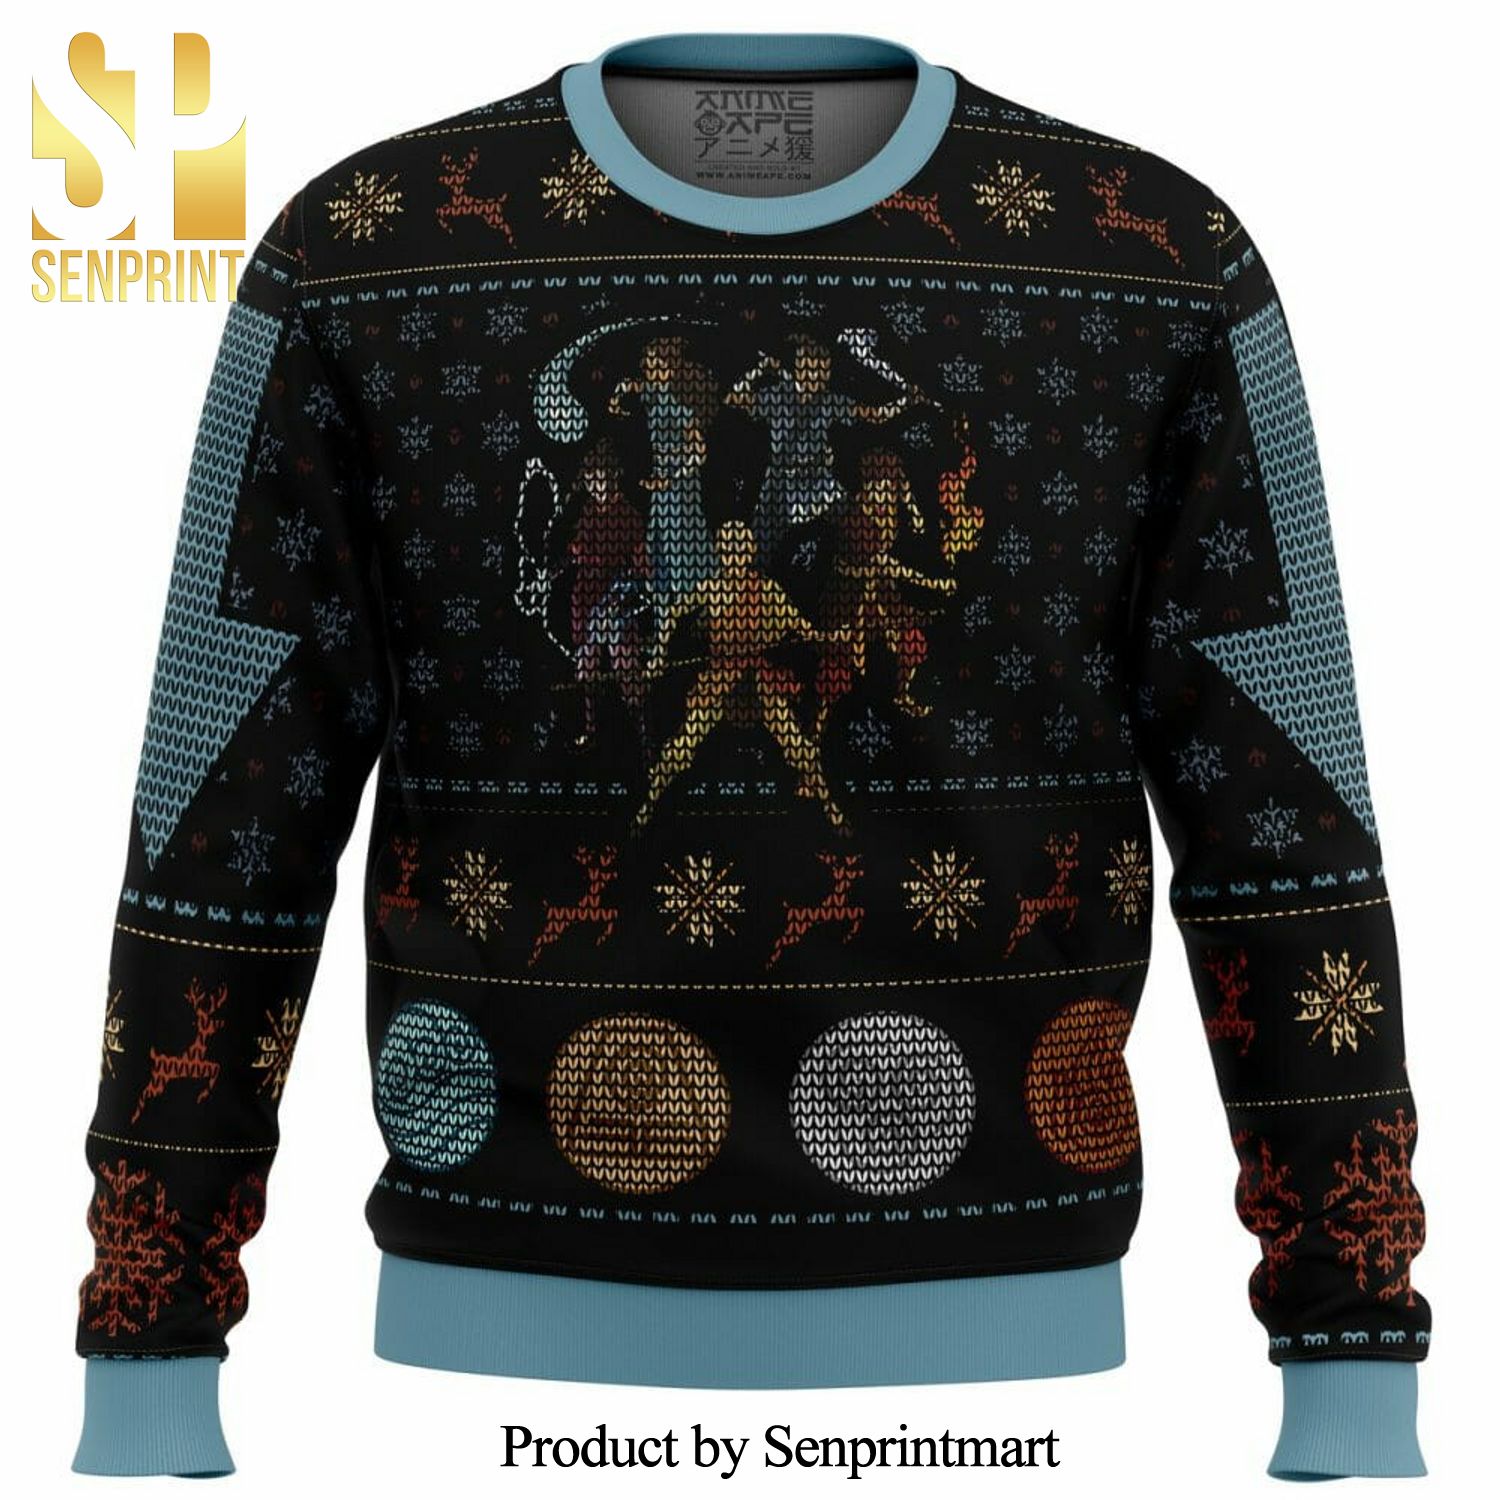 Avatar The Last Airbender Characters Manga Anime Knitted Ugly Christmas Sweater